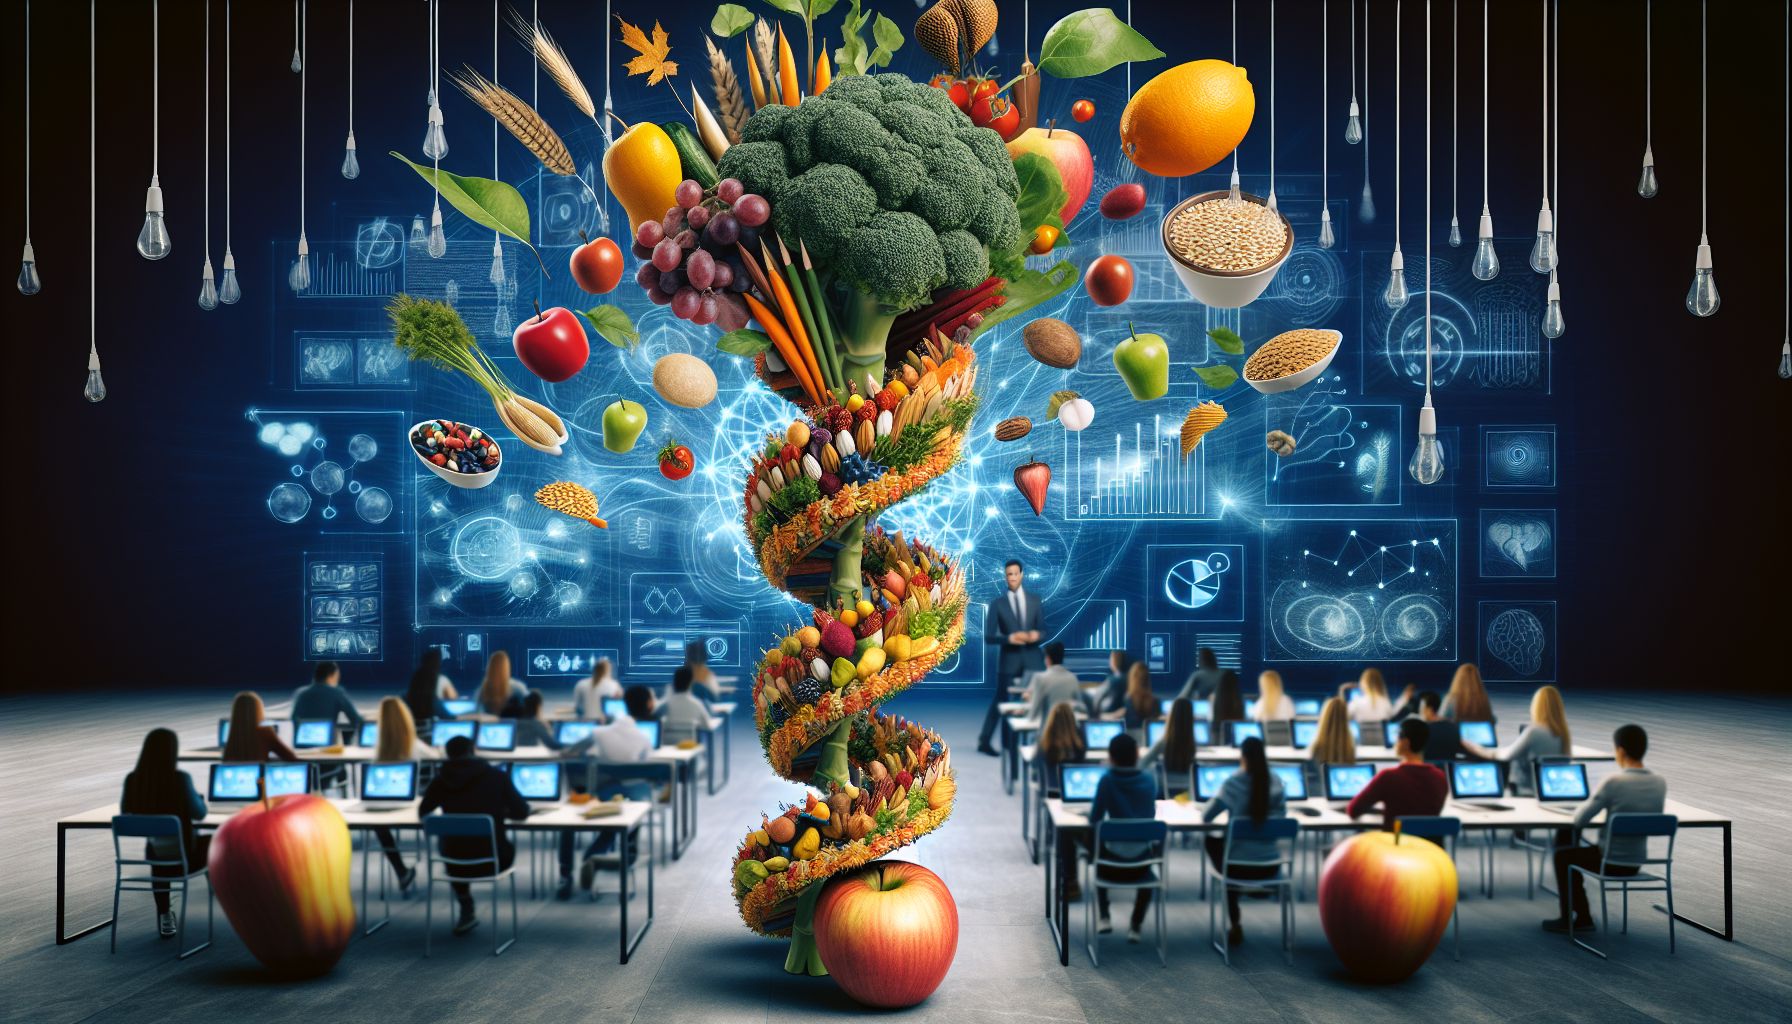 Is Our Relationship with Food Shaping the Future of Education?